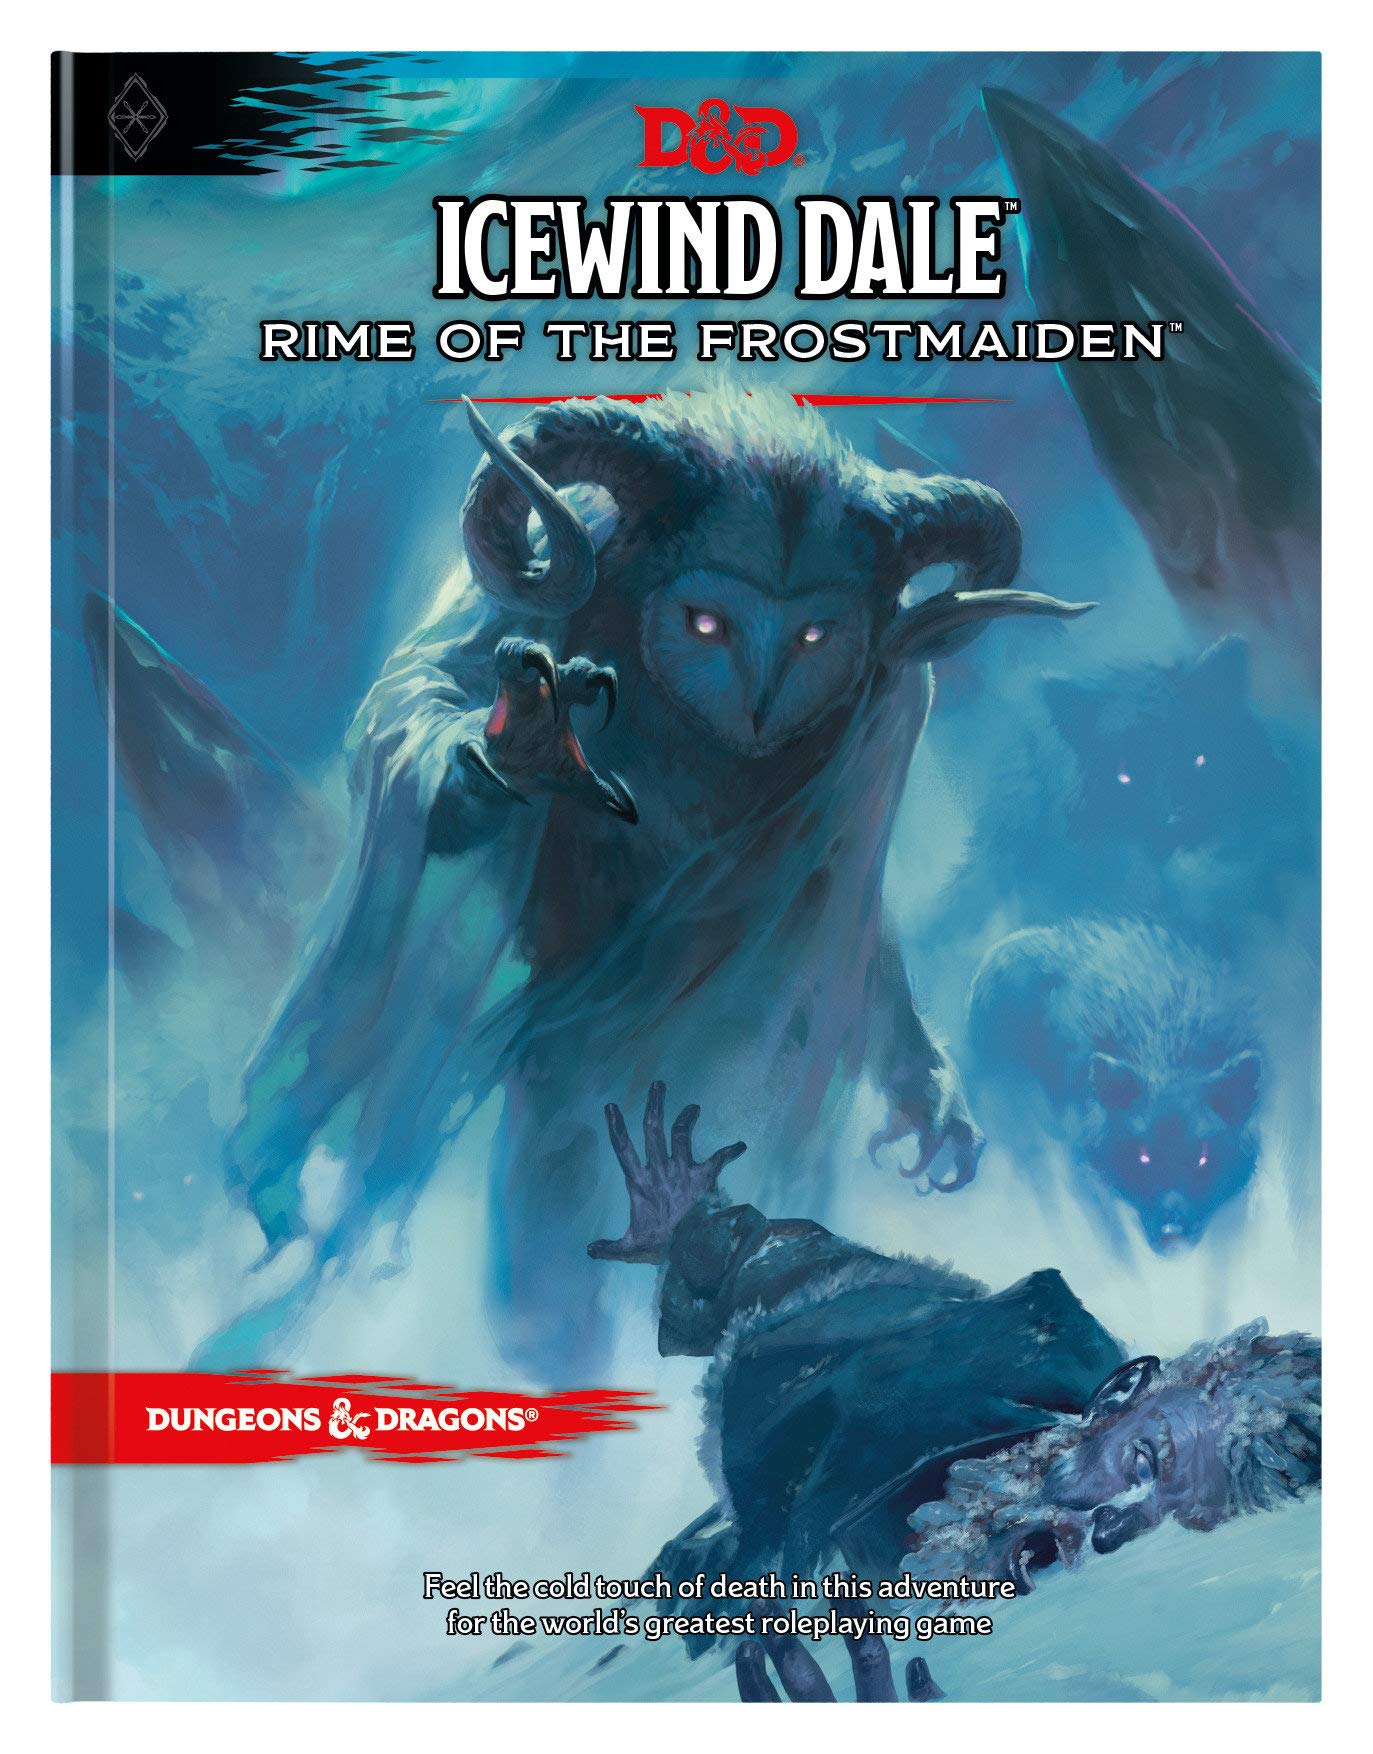 D&D ICEWIND DALE RIME OF THE FOSTMAIDEN